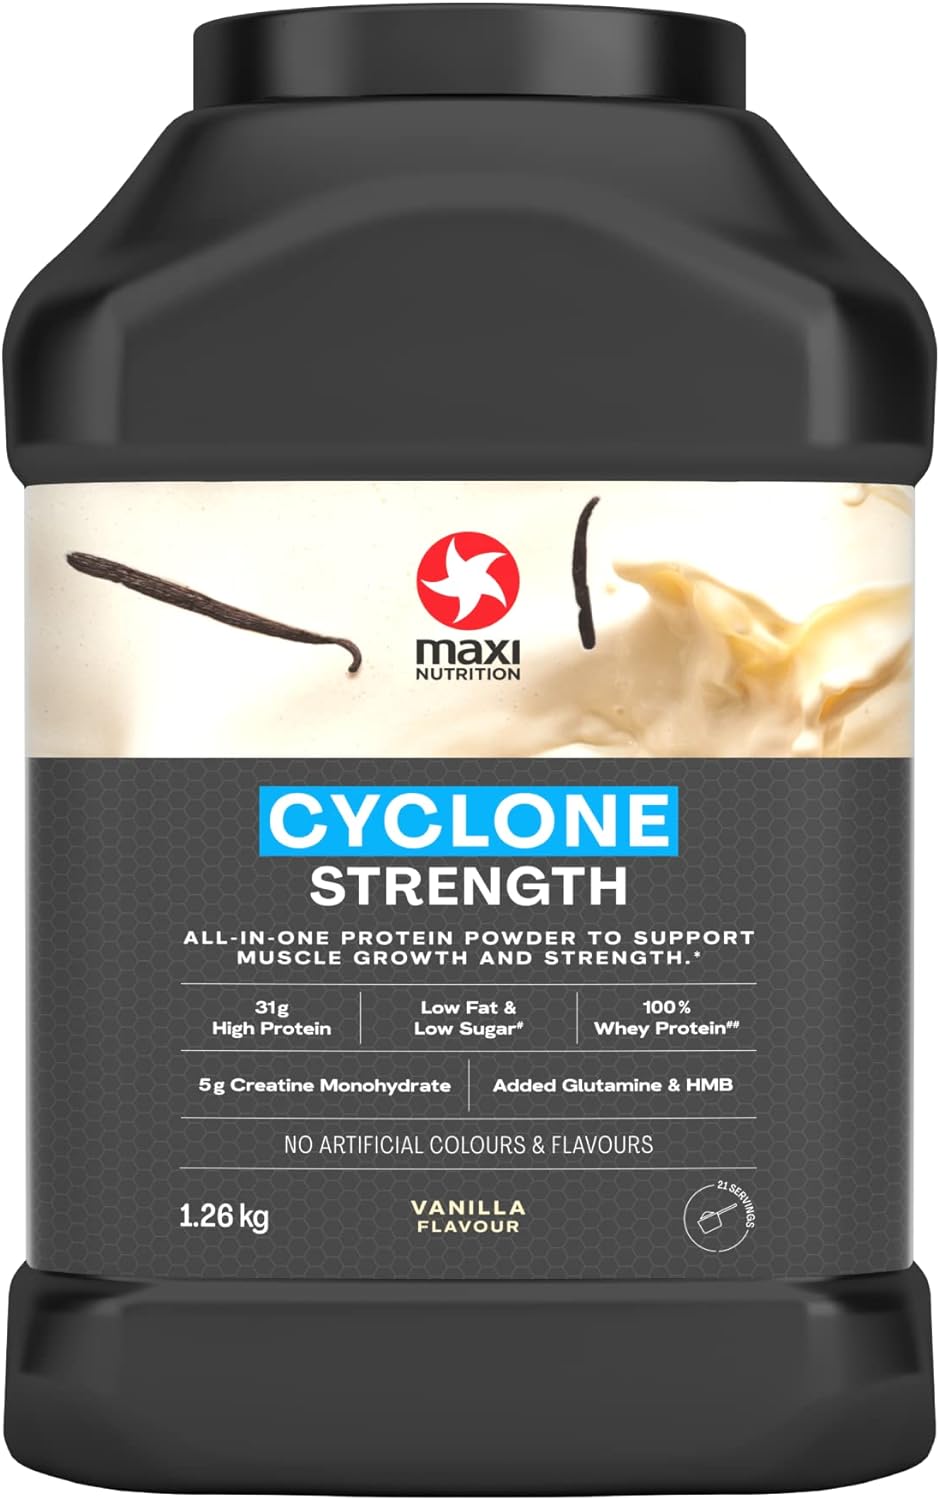 MaxiNutrition - Cyclone, Vanilla - Premium Whey Protein Powder with Added Creatine ? Low in Sugar and Fat, Vegetarian-Friendly - 31g Protein, 206 kcal per Serving, 1.26kg